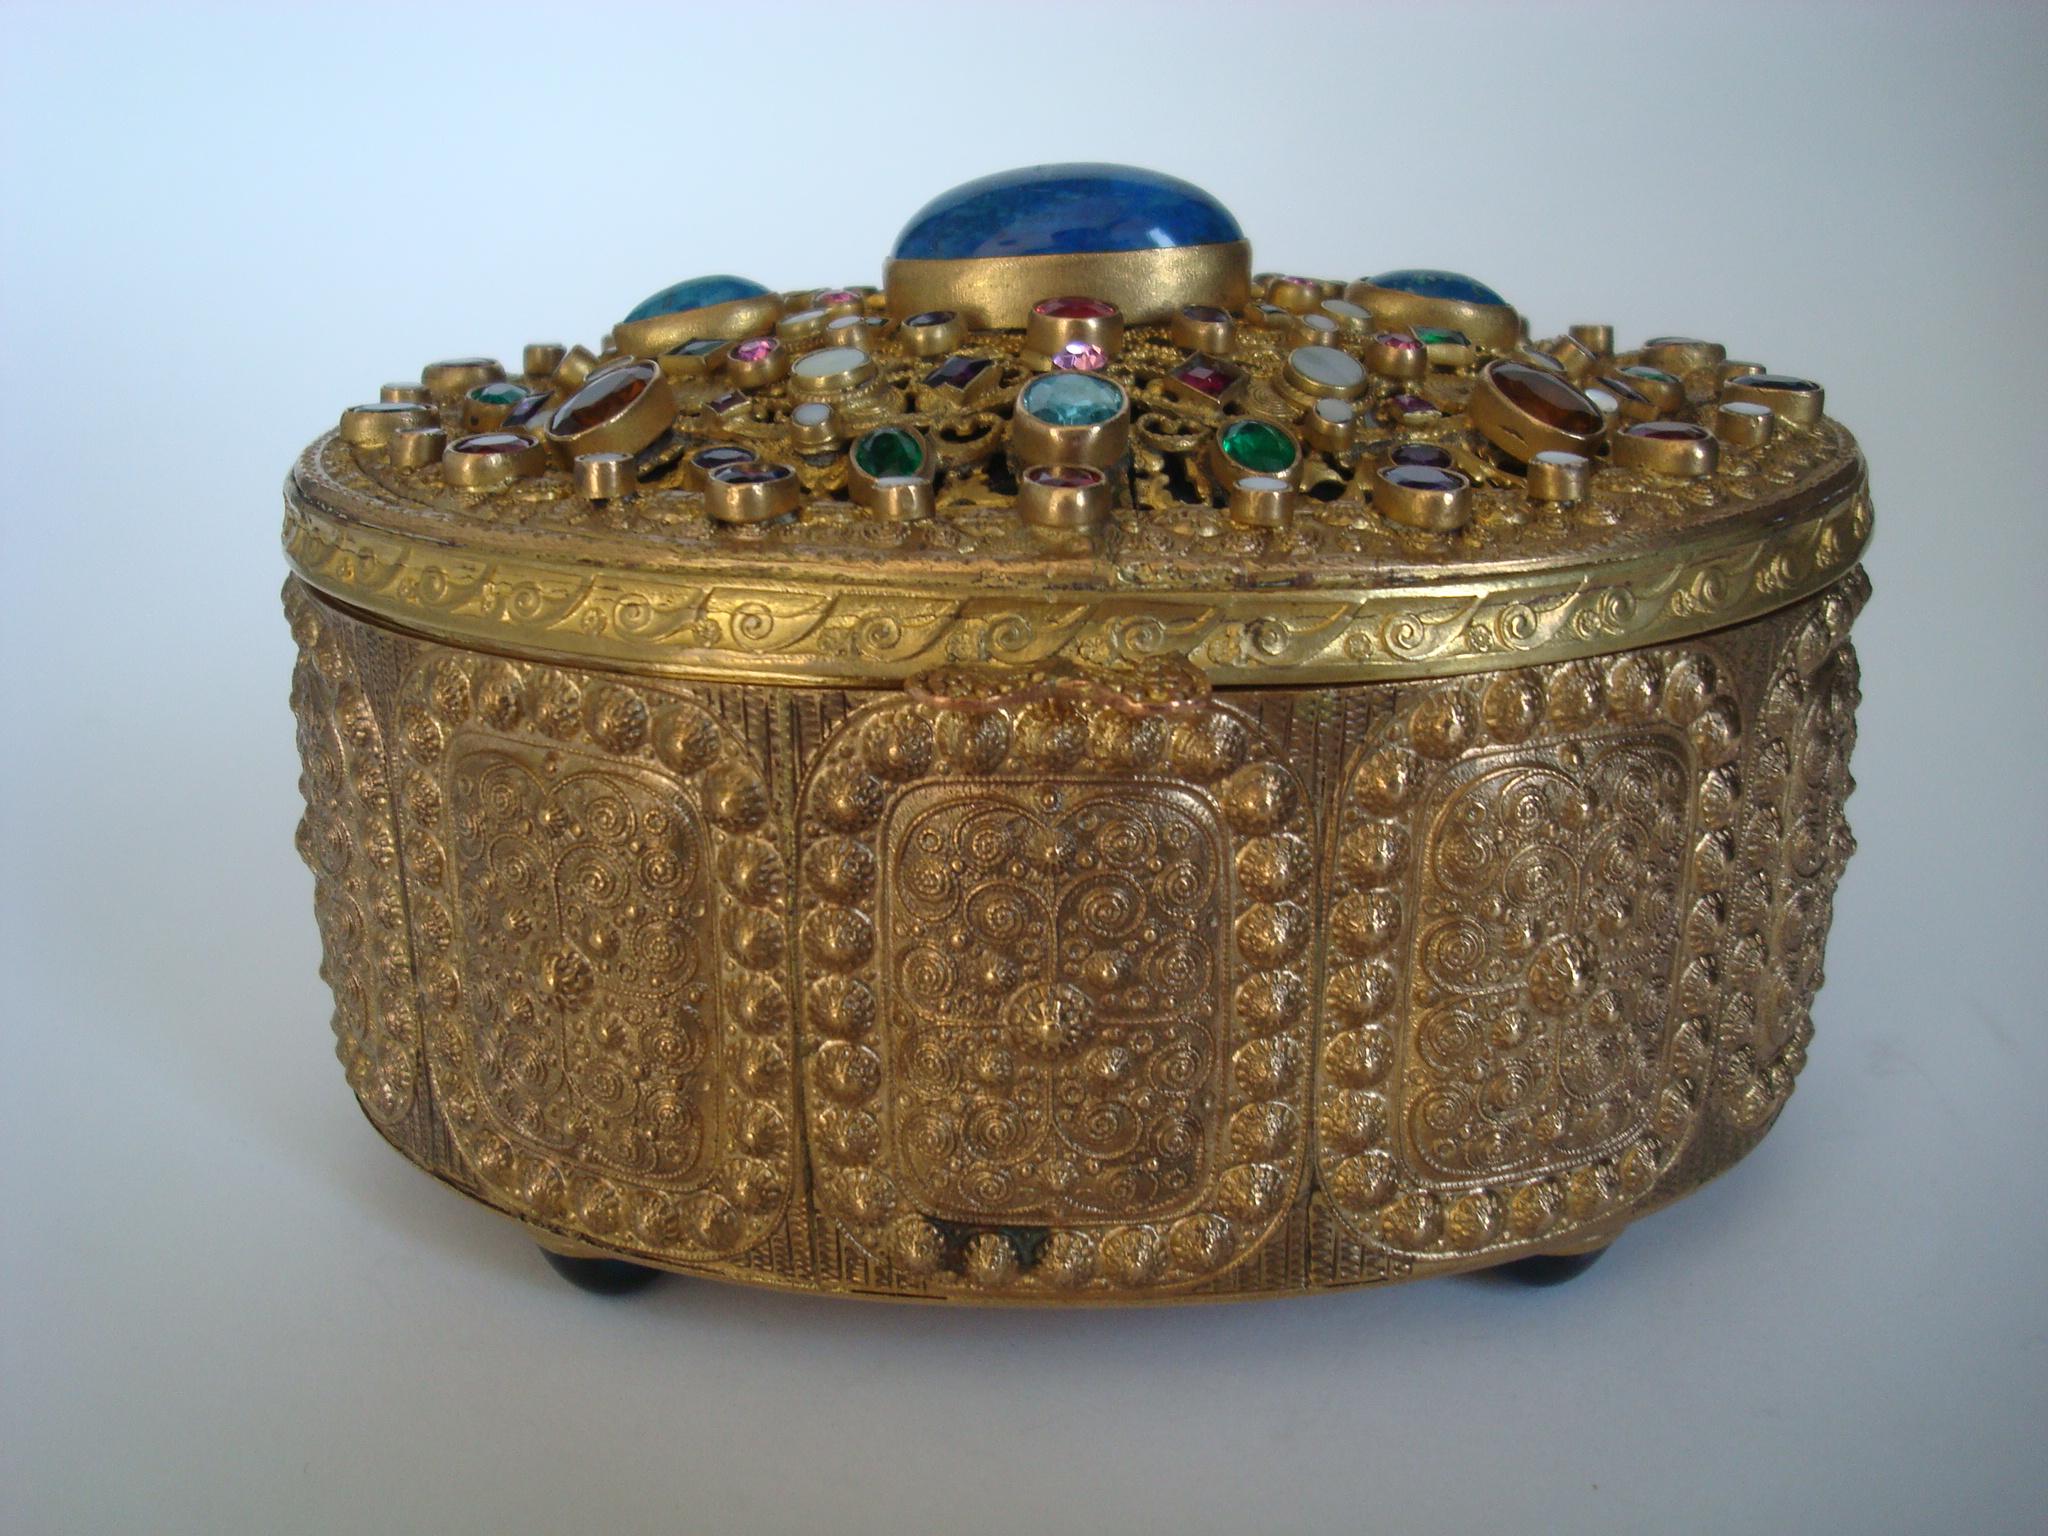 This early 1900s gilded bronze box was made in Austria and shows all the quality of their pieces.
The top has a large central stone. The sides are in an intricate bronze ormolu panel design and the whole box sits on 4 round feet. The interior is